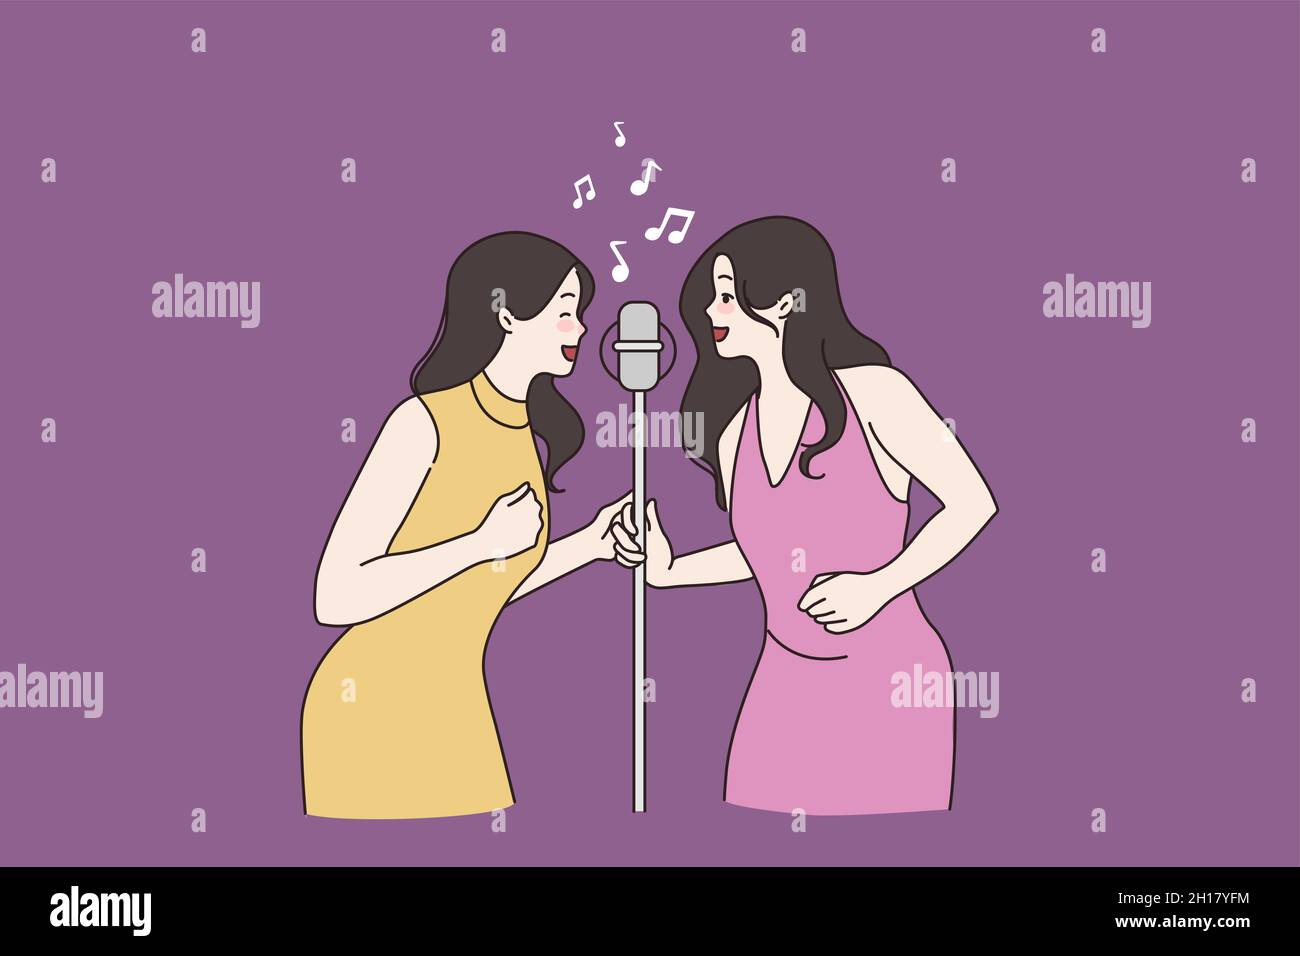 Page 2 - Karaoke Bar High Resolution Stock Photography and Images - Alamy